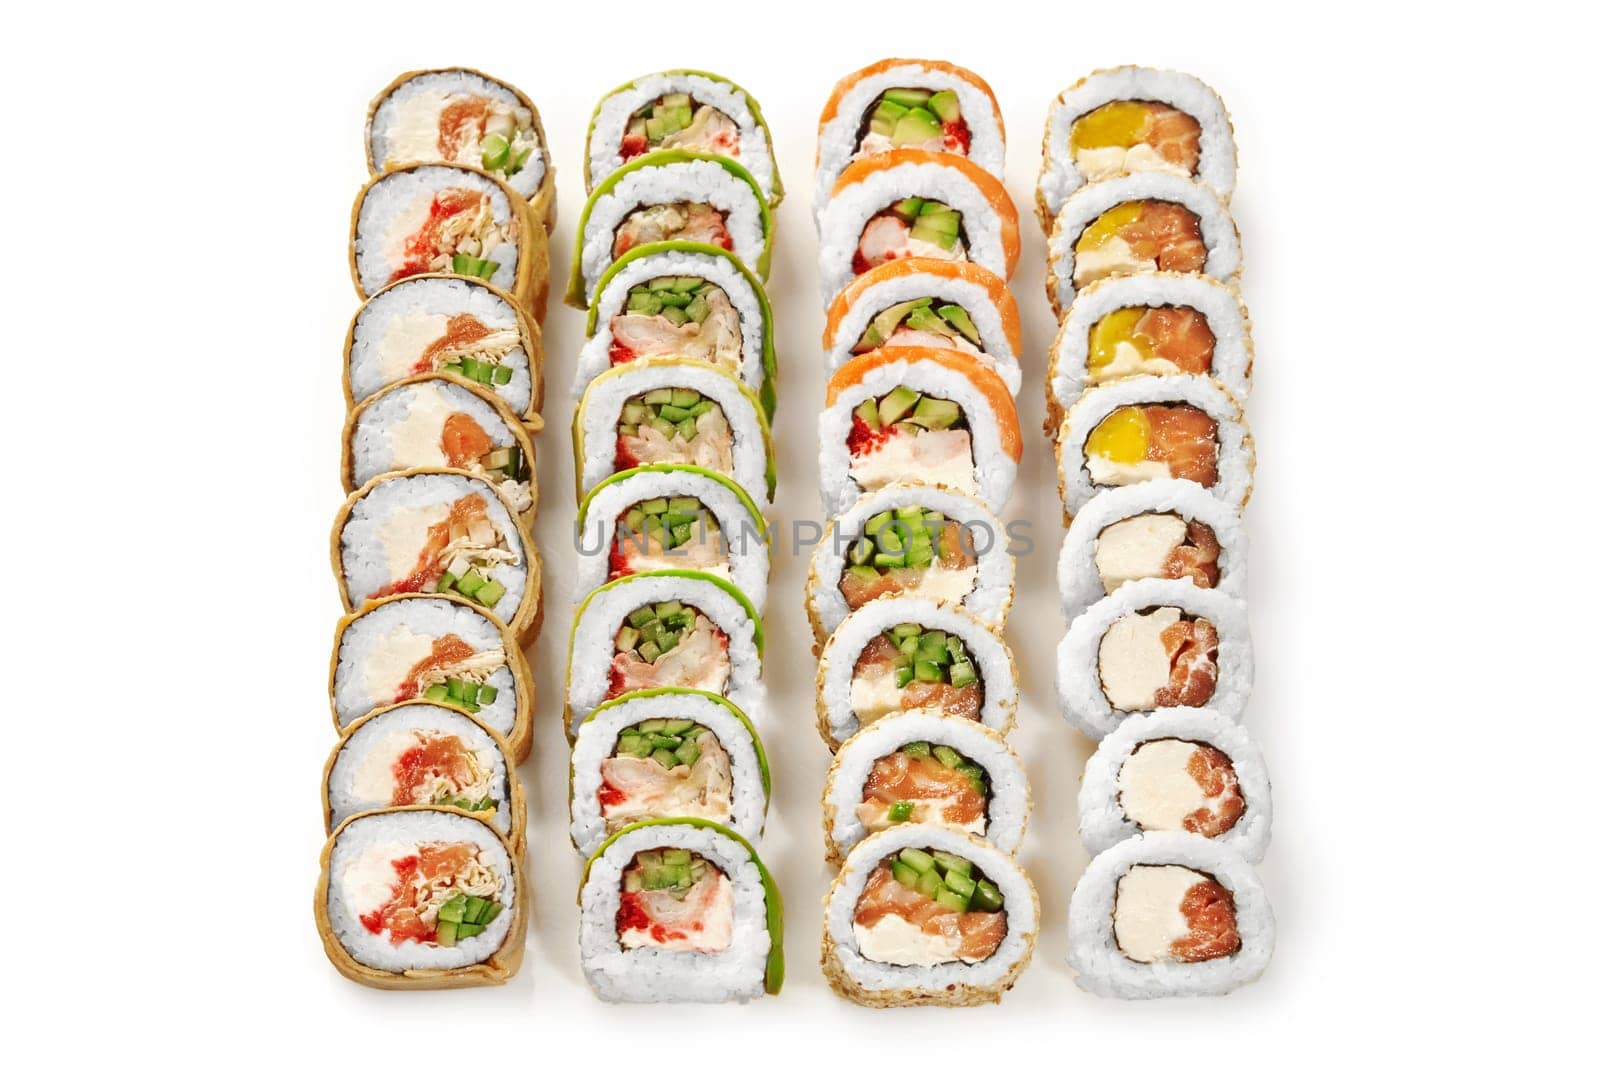 Enticing set of various sushi rolls with salmon, tobiko, cream cheese, mango and vegetables arranged on white background. Popular Japanese snacks concept